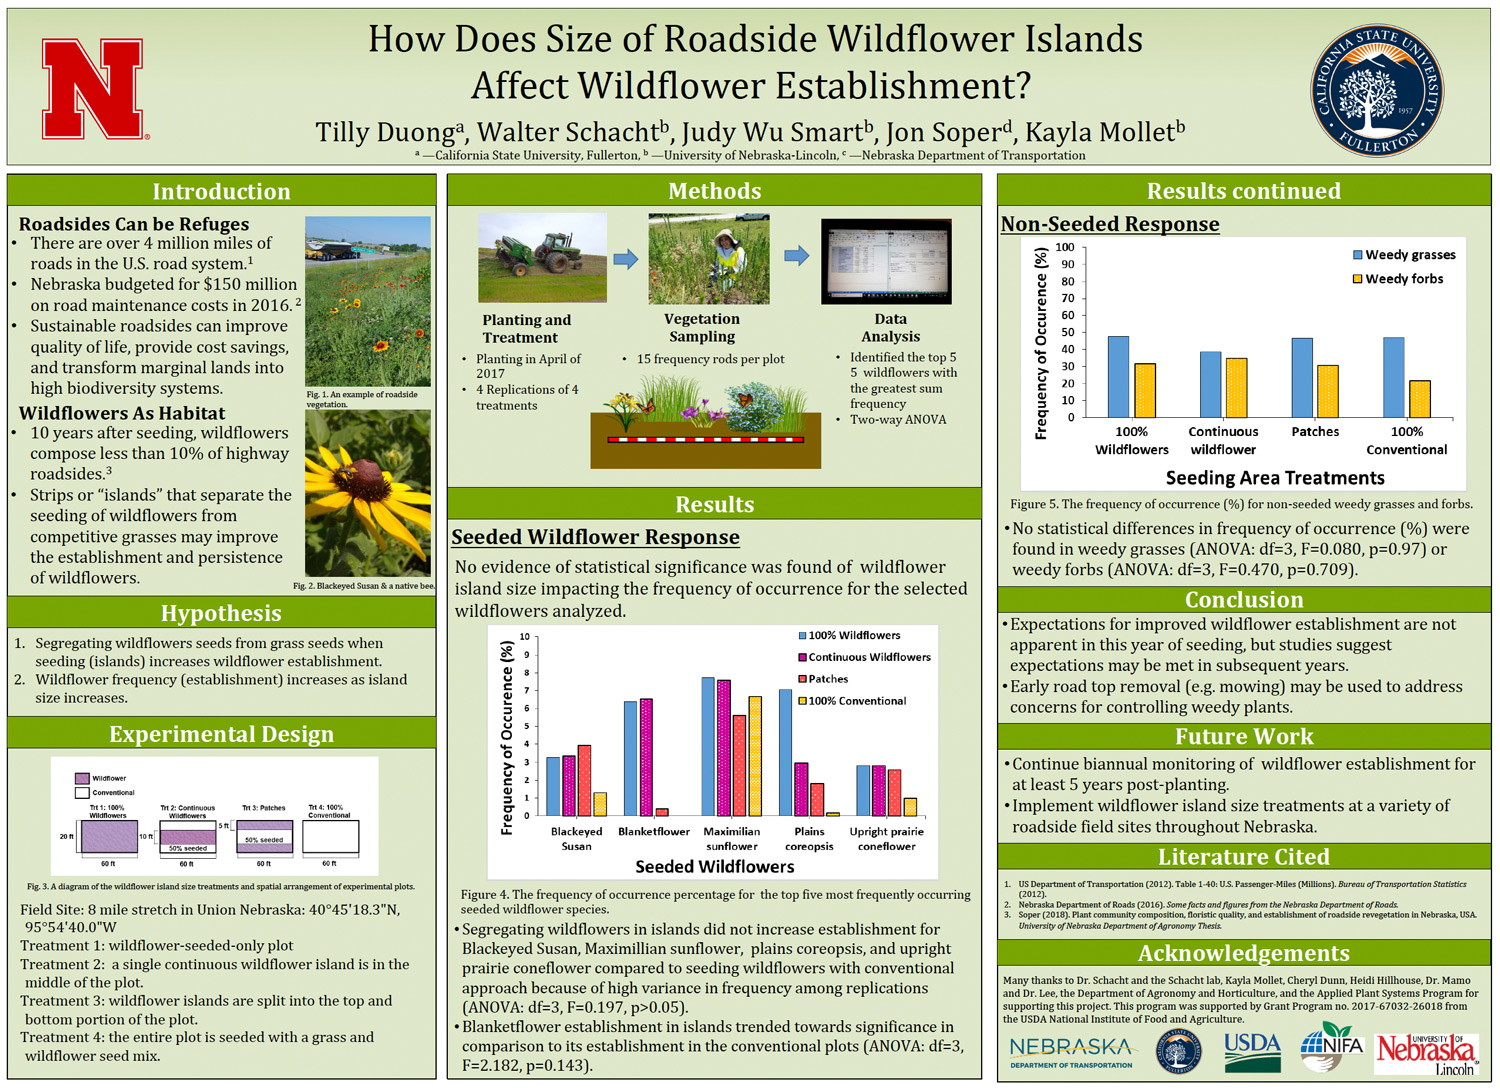 How Does Size of Roadside Wildflower Islands Affect Wildflower Establishment? poster